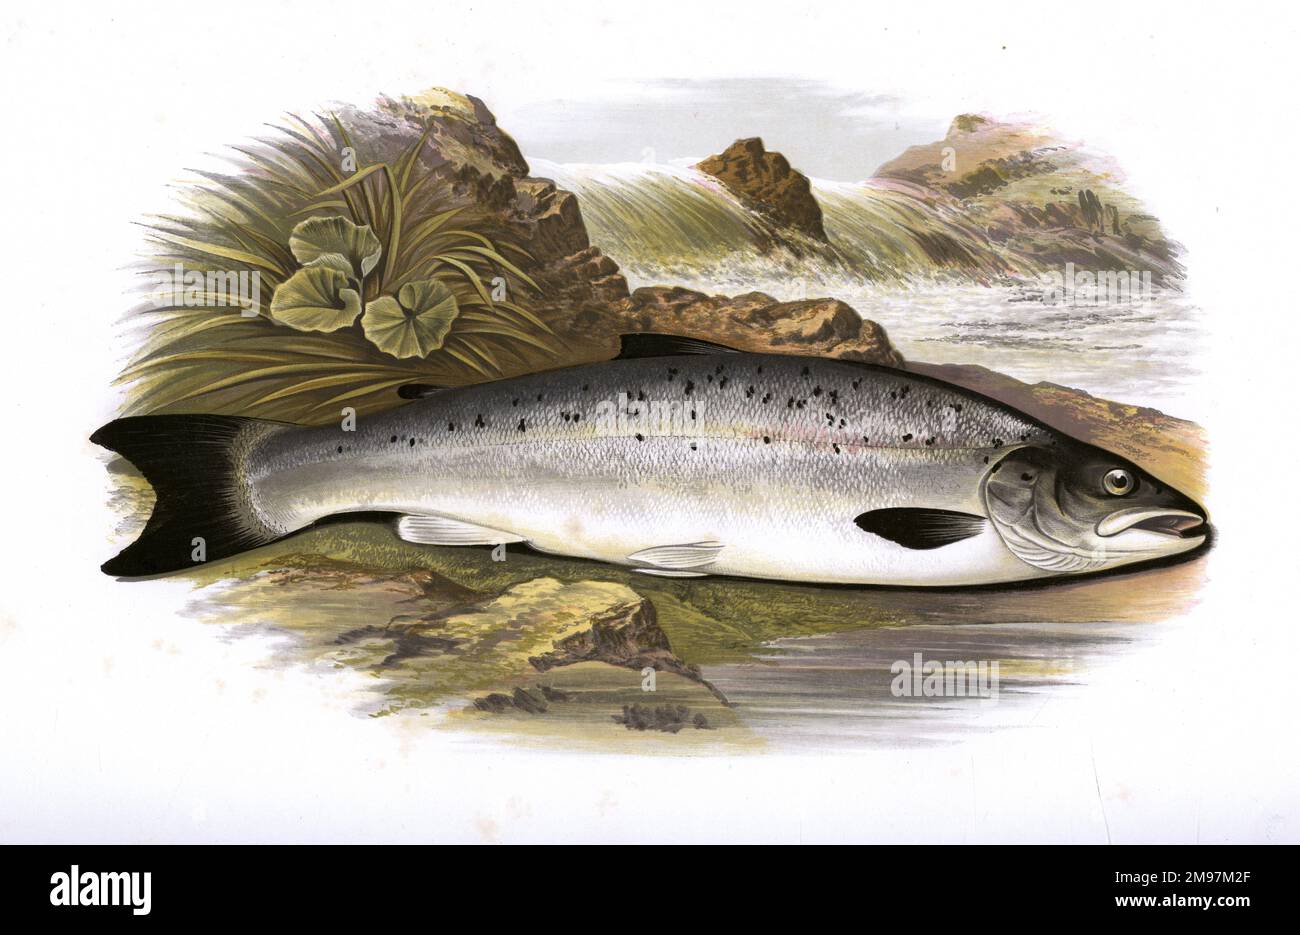 Salmo salar, or Atlantic Salmon, a freshwater and marine variety.  This young salmon is known as a Grilse, which means that it has spent only one winter at sea before returning to the river. Stock Photo